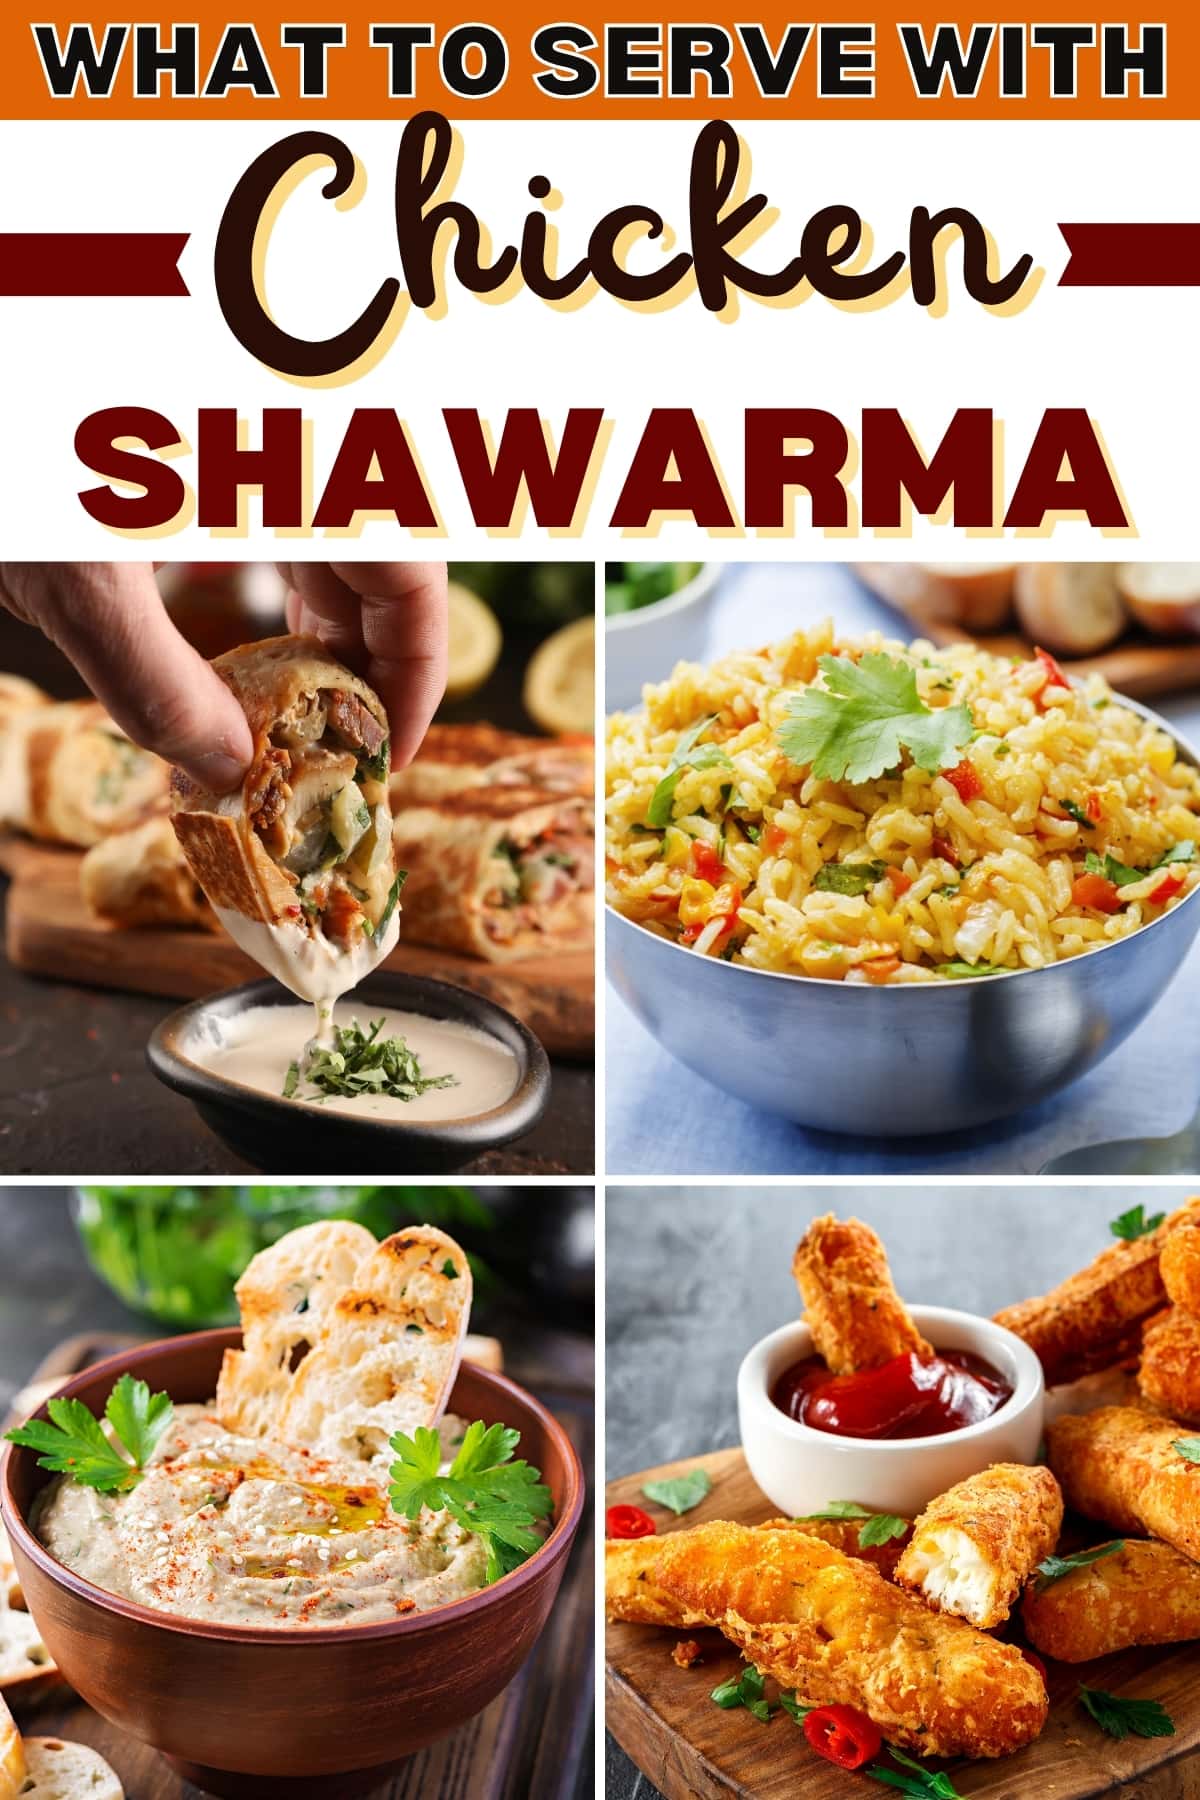 What to Serve with Chicken Shawarma